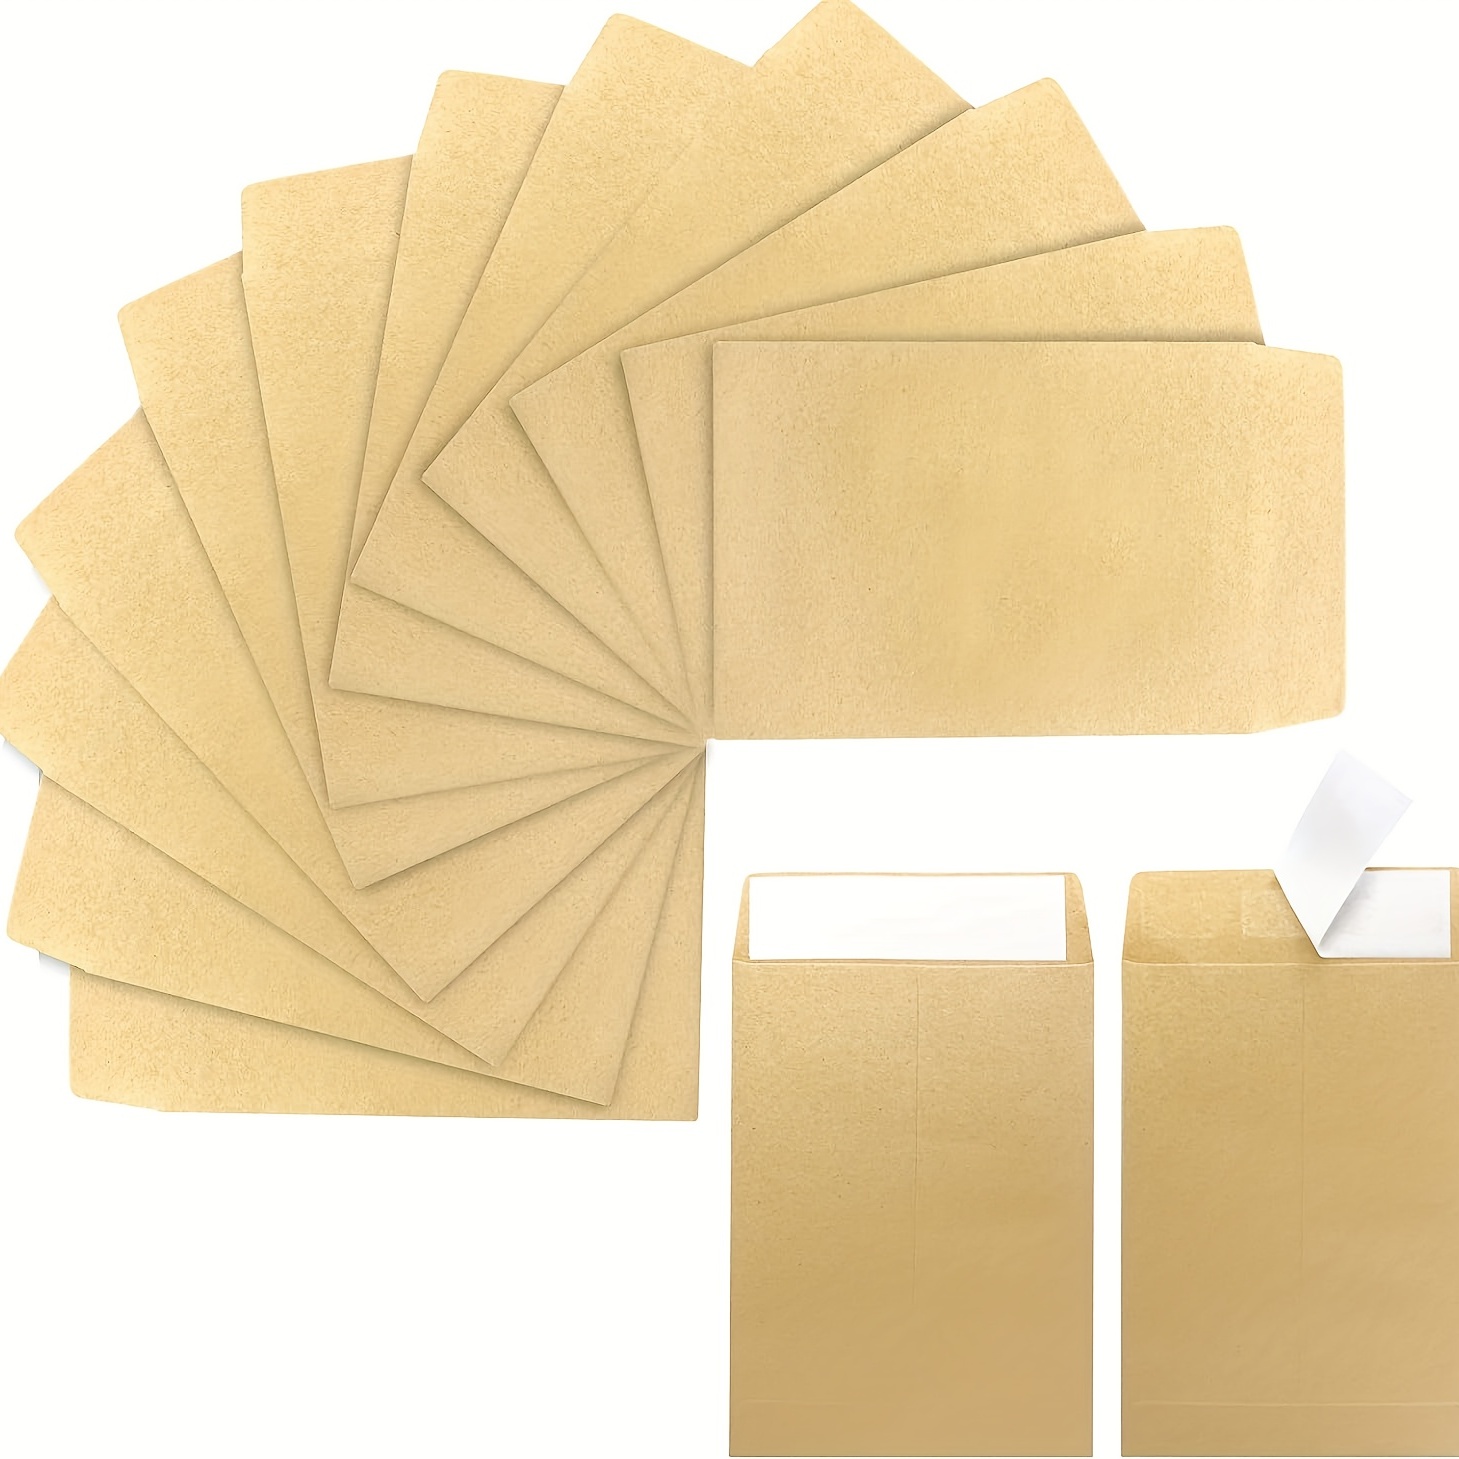 100 Pack White Kraft Small Coin Envelopes Self-Adhesive Seed Envelopes Mini Parts Small Items Stamps Storage Packets Envelopes for Garden, Office or